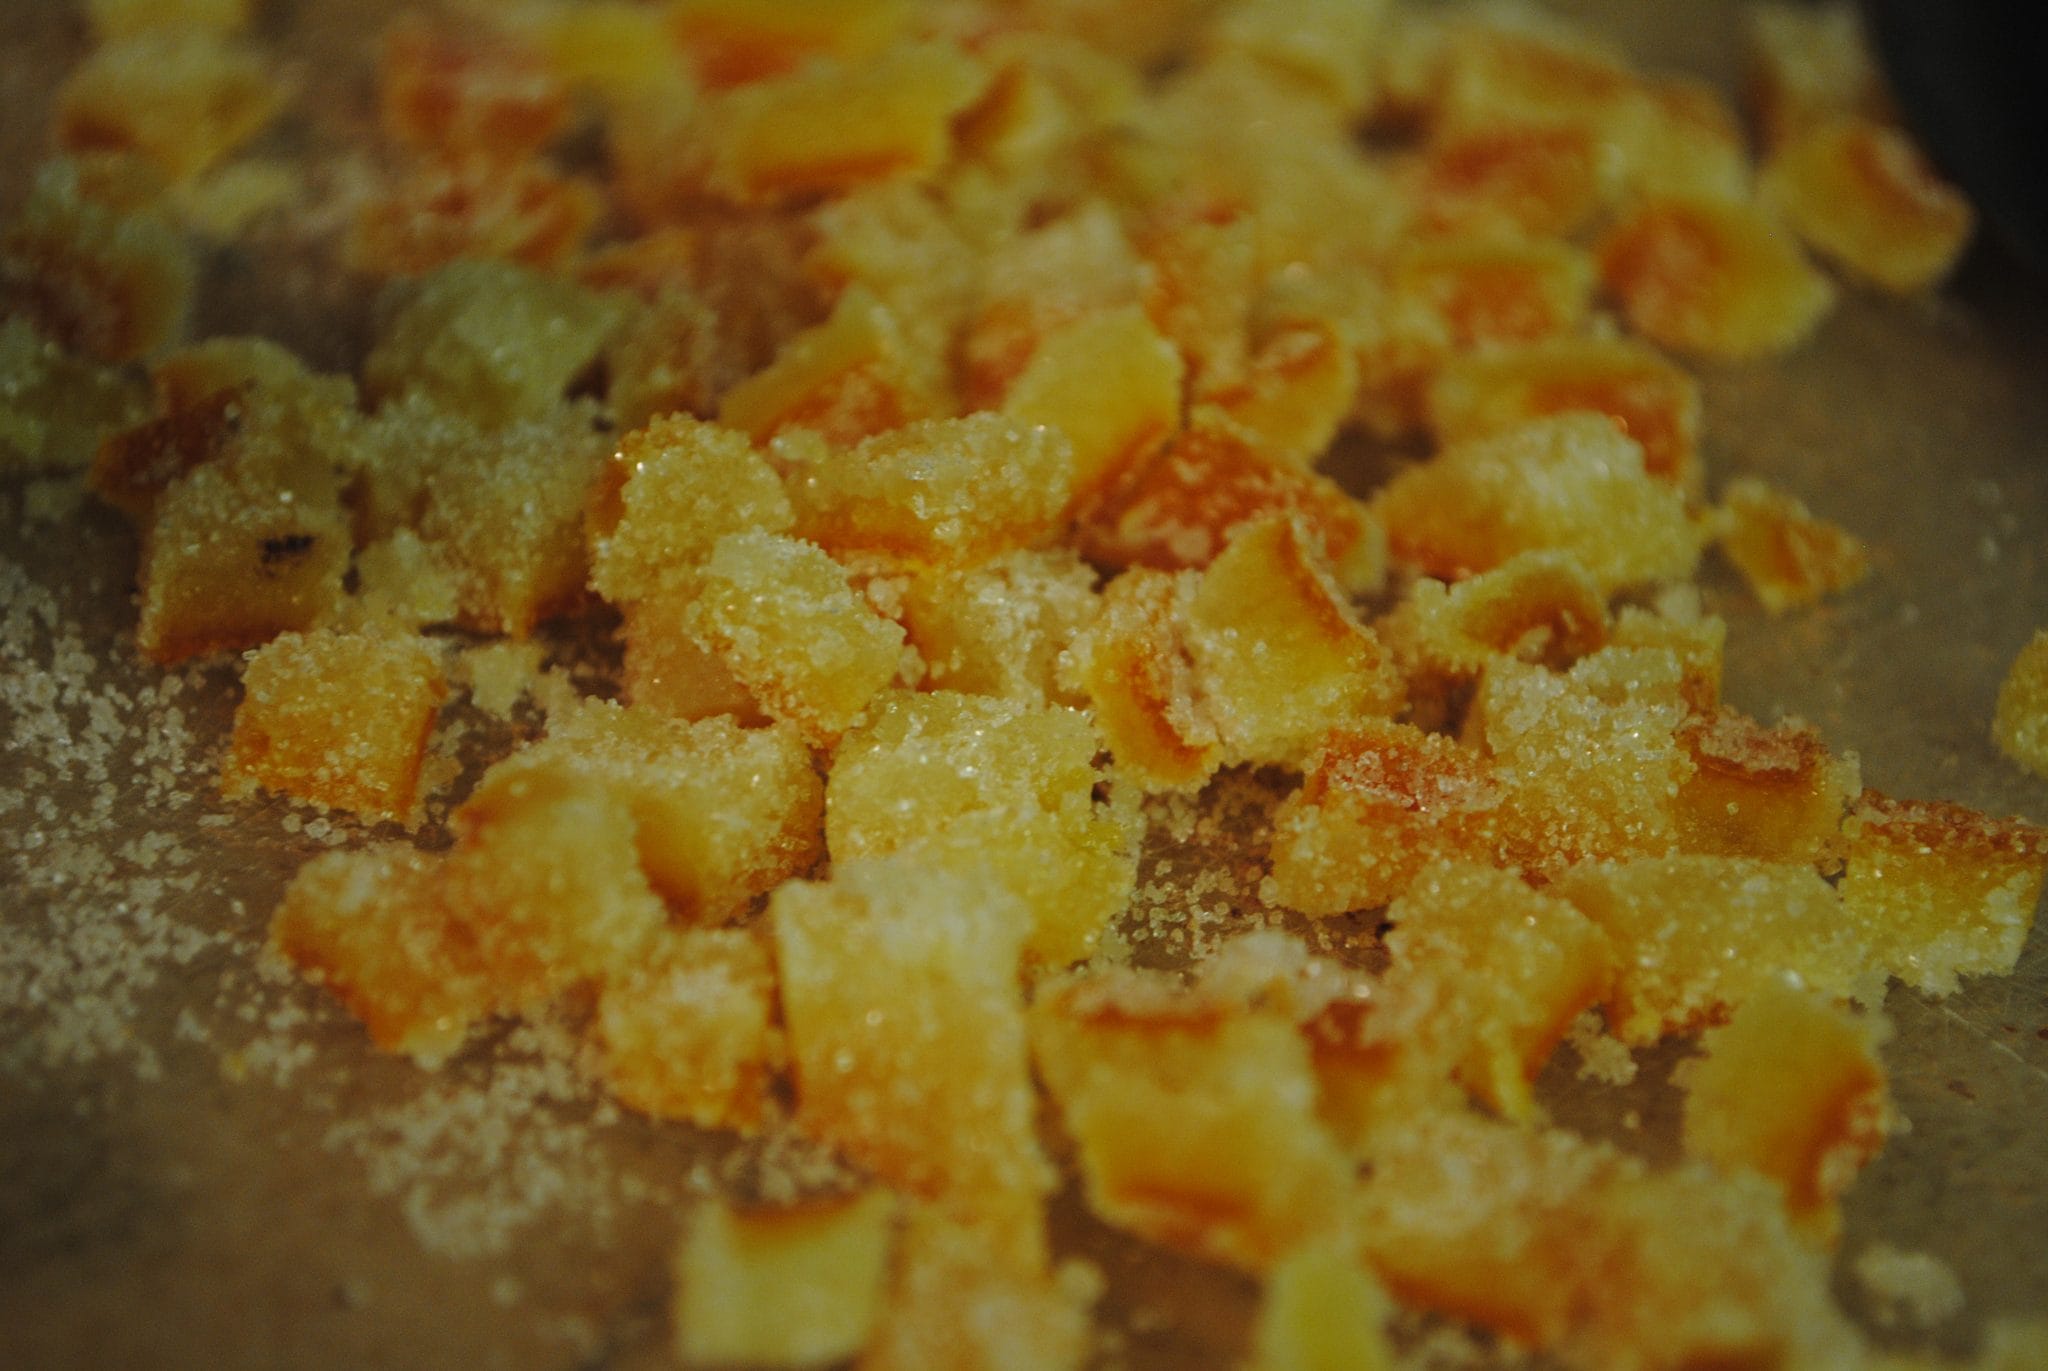 Close up view of sugar coated bread pieces.